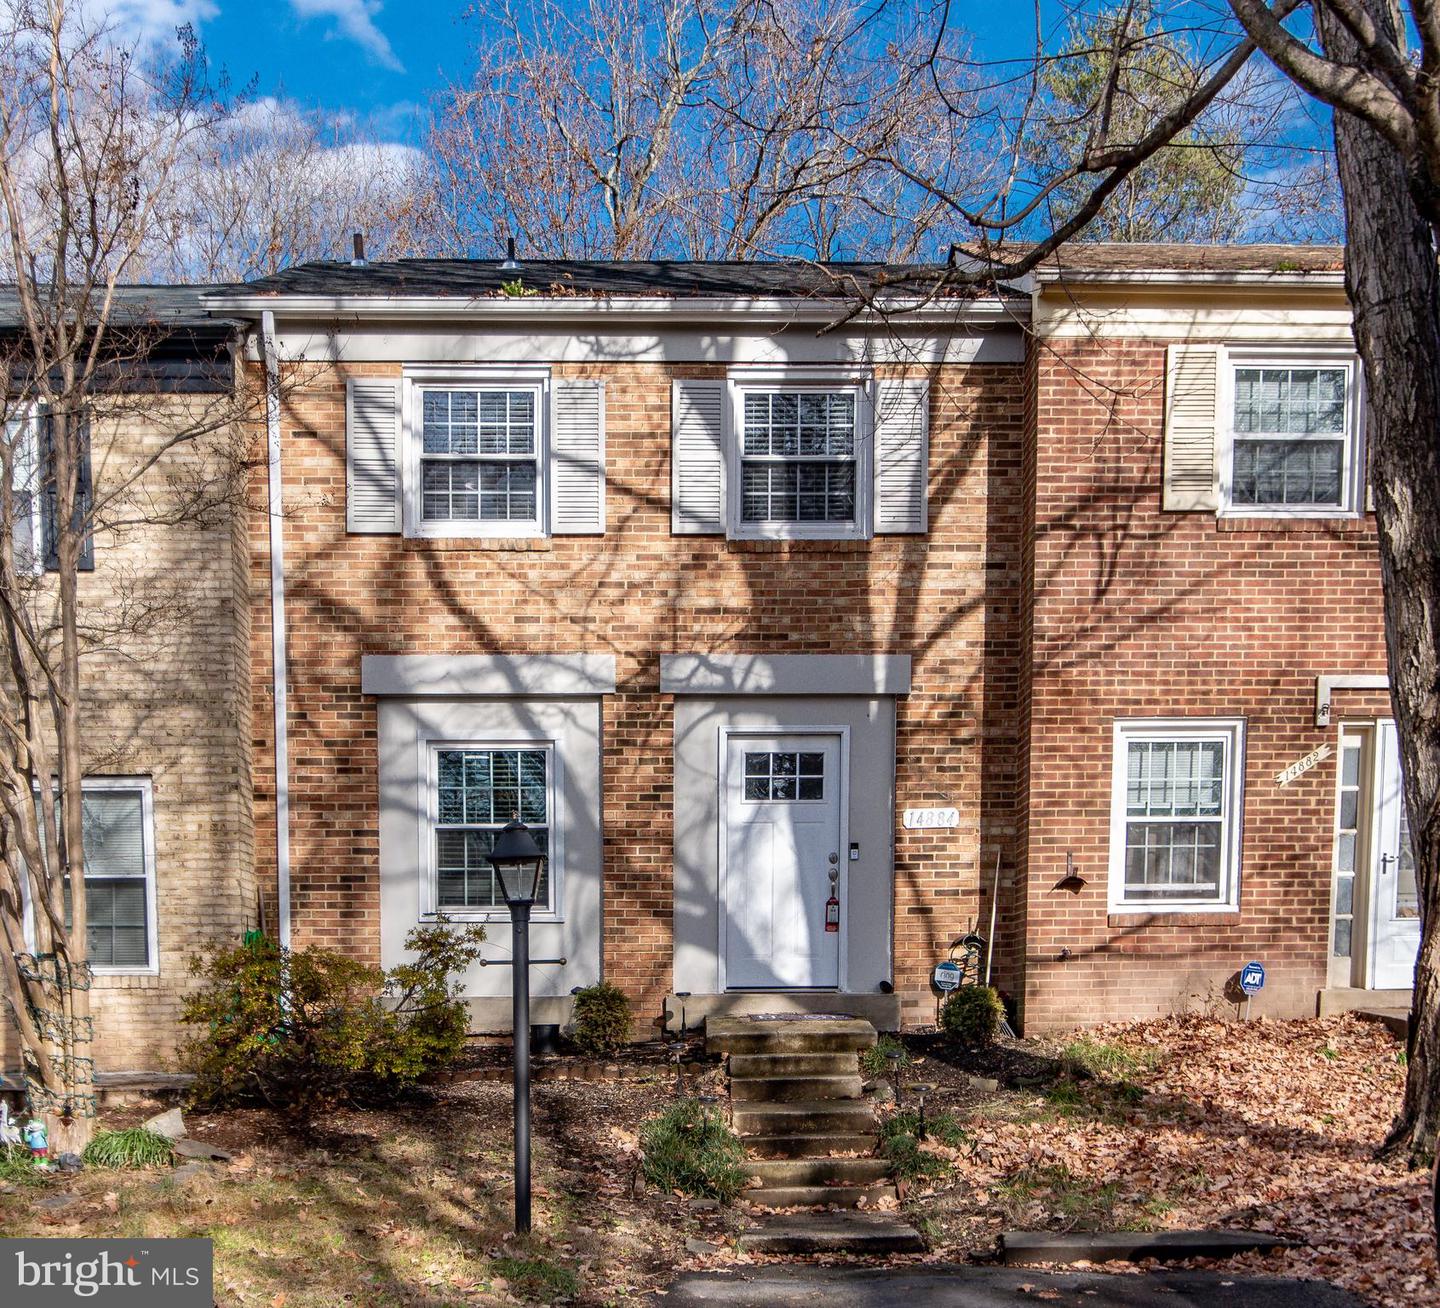 View Centreville, VA 20120 townhome